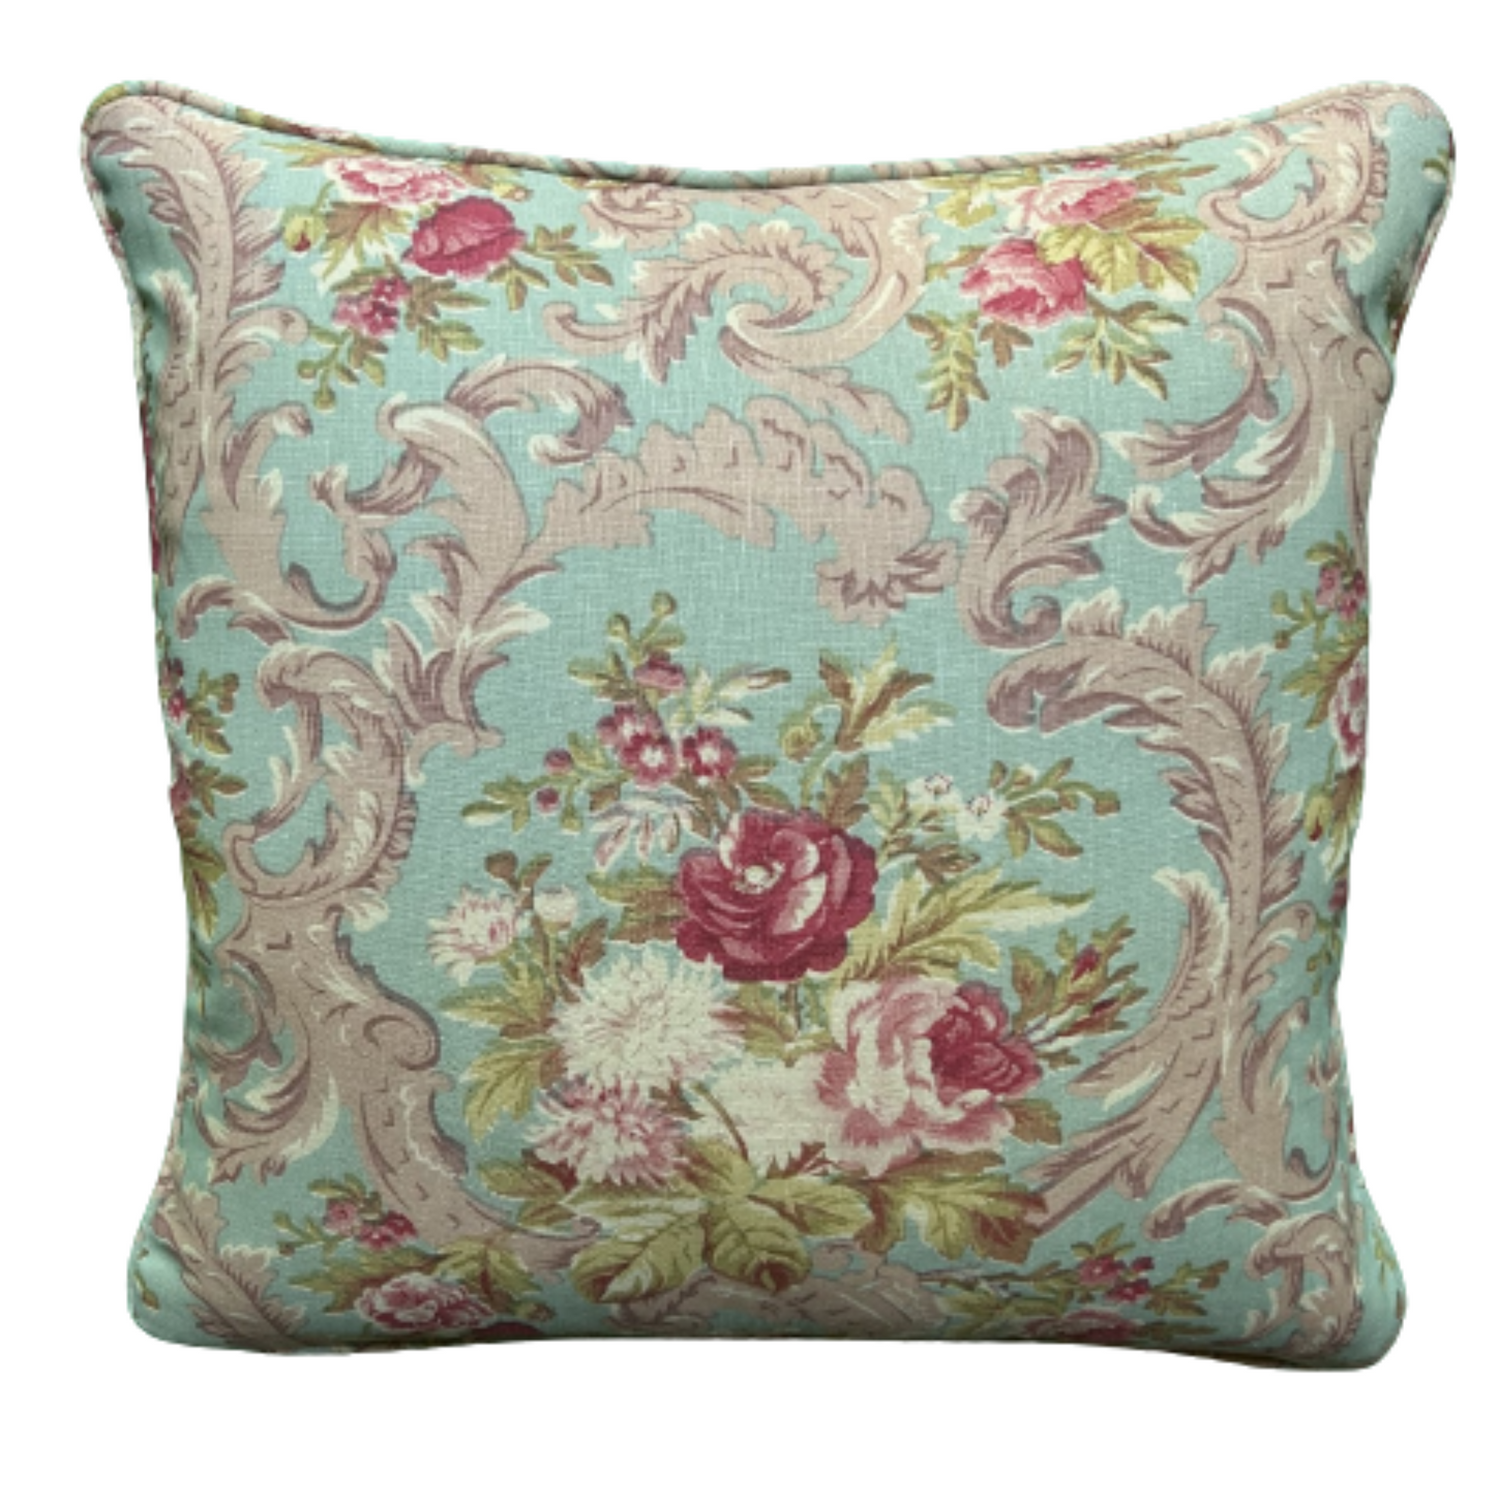 Wynwood Hand Printed Aqua Floral Square 18 x 18 Decorative Pillow with Down Feather Insert